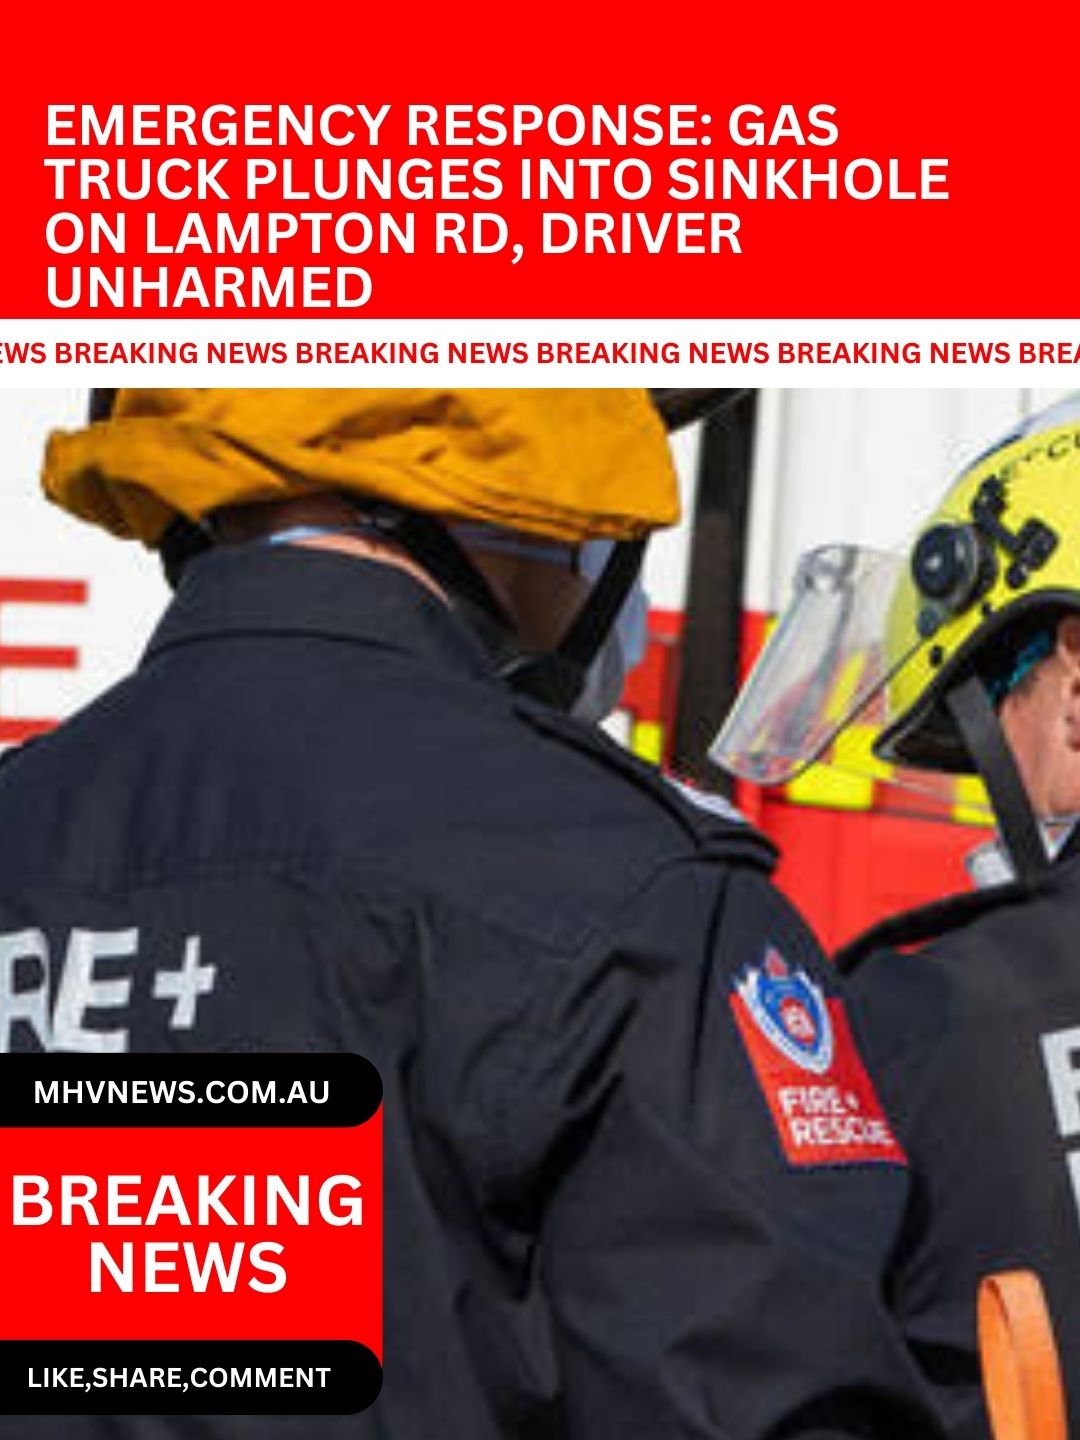 You are currently viewing Emergency Response: Gas Truck Closplase into Sinkhole on Lambton Rd, Driver Unharmed